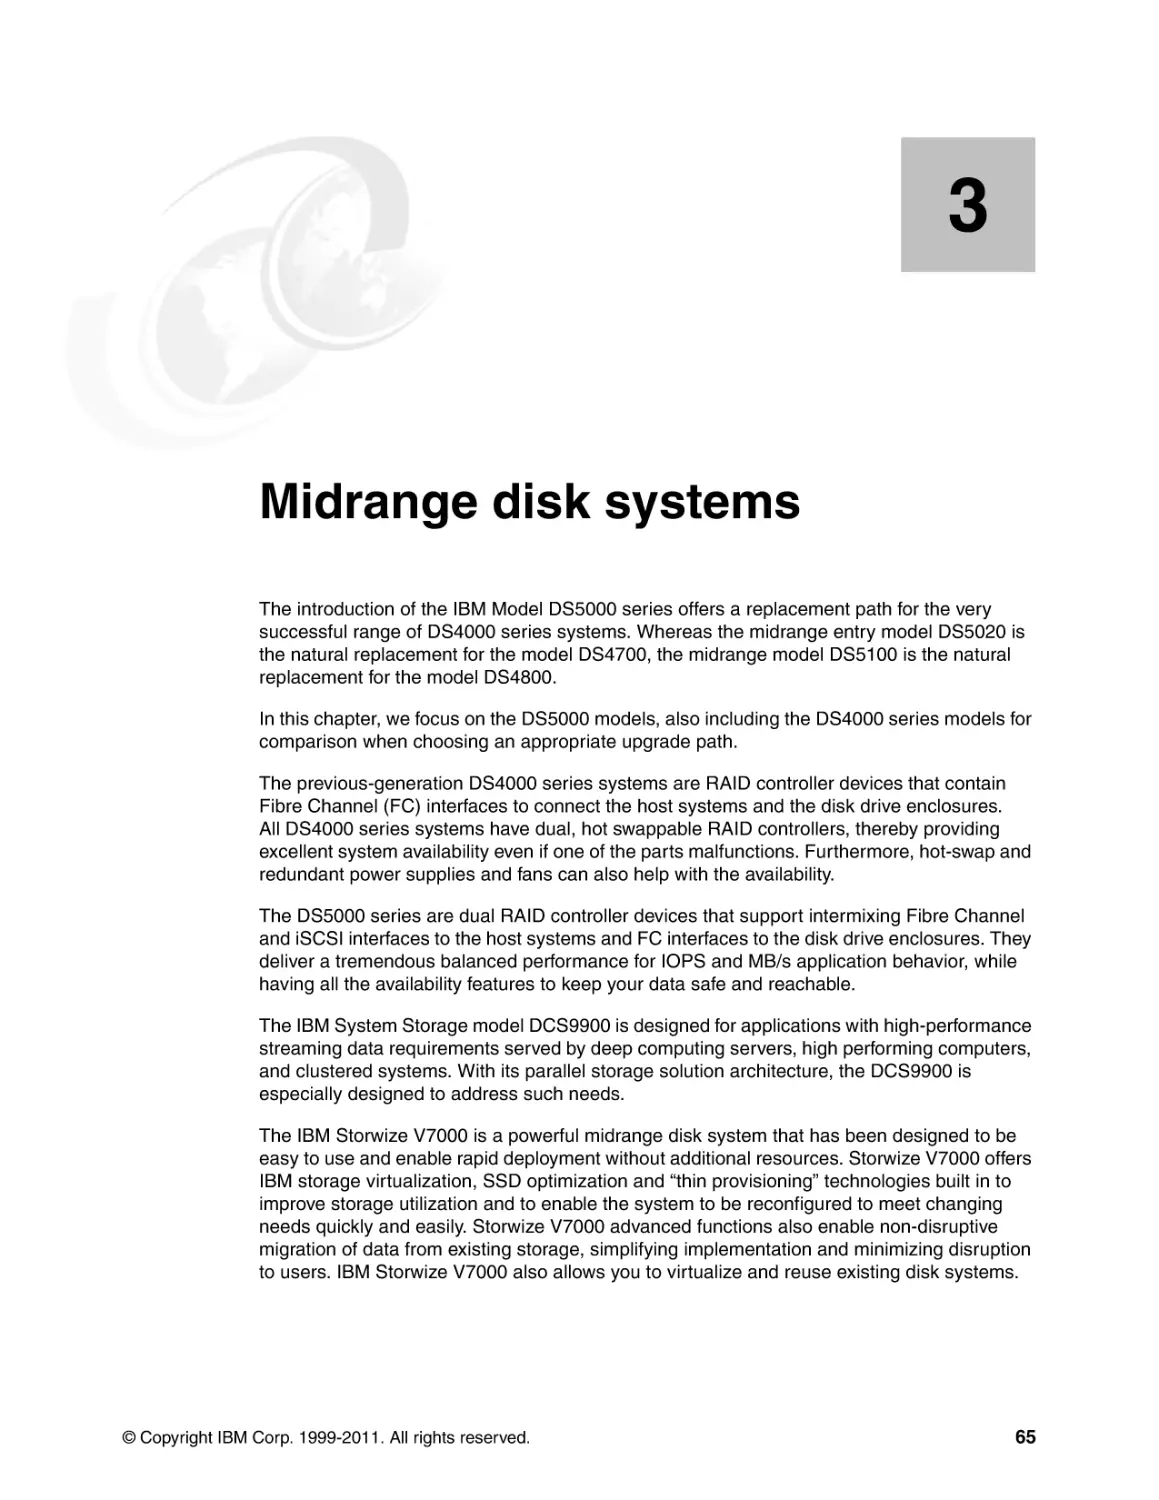 Chapter 3. Midrange disk systems